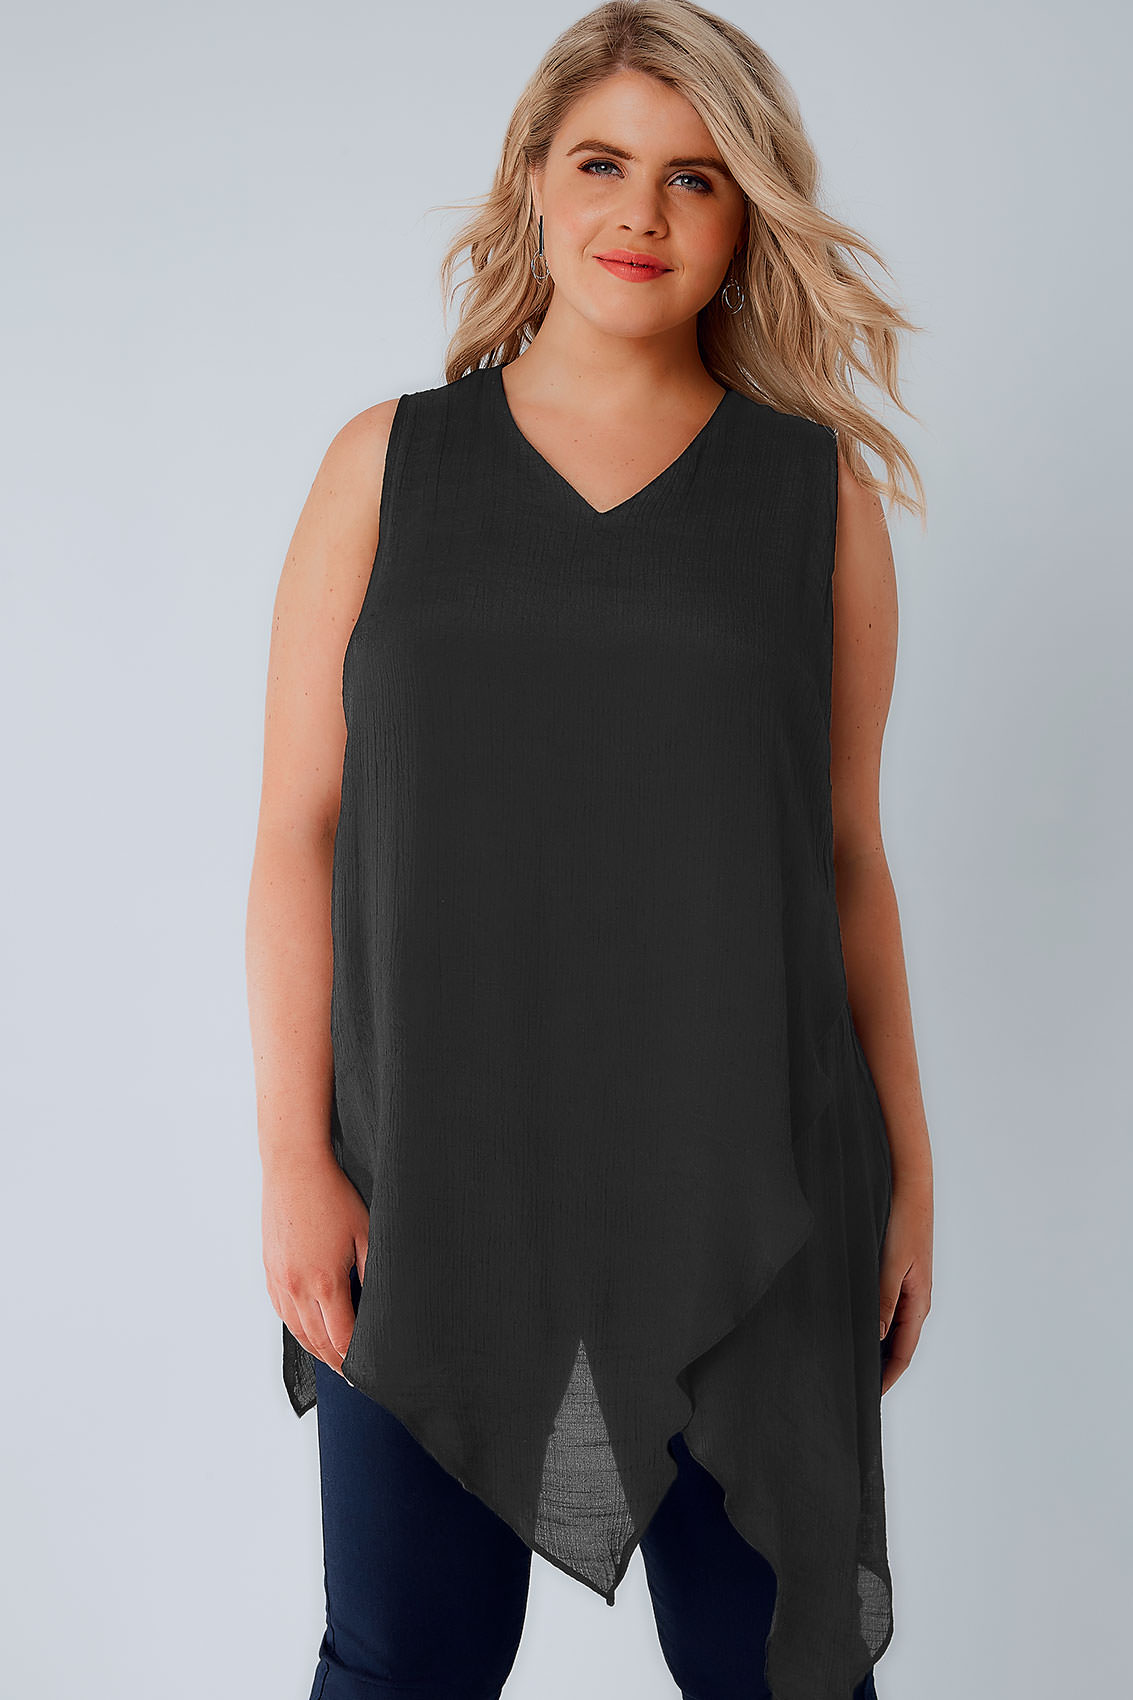 Black Sleeveless Top With Layered Front, Plus size 16 to 36